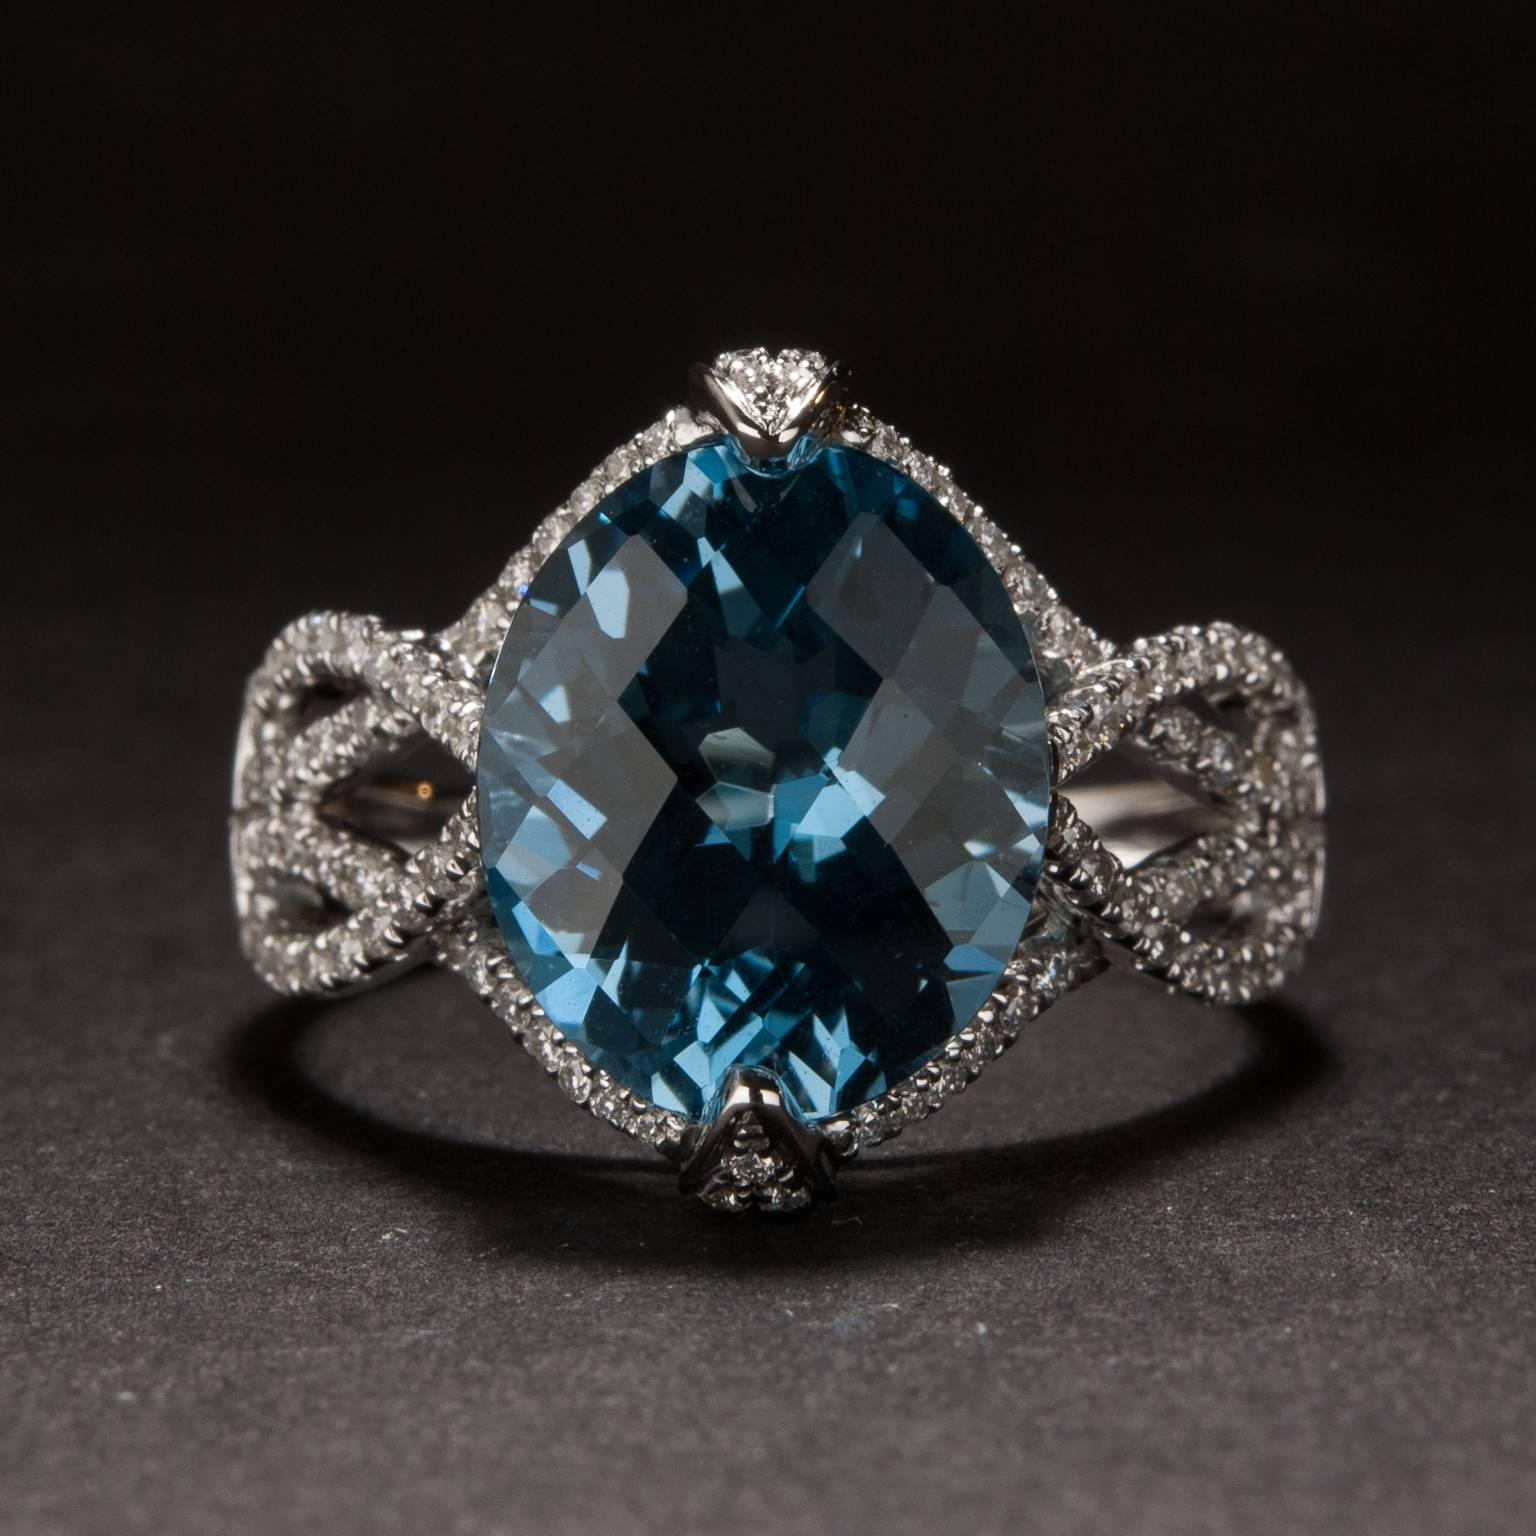 This extraordinary ring features a 5.50 carat blue topaz at it's center and .33 total carats of diamond along its elegantly designed shank. The mounting is crafted in 14k white gold and is size 7.25.